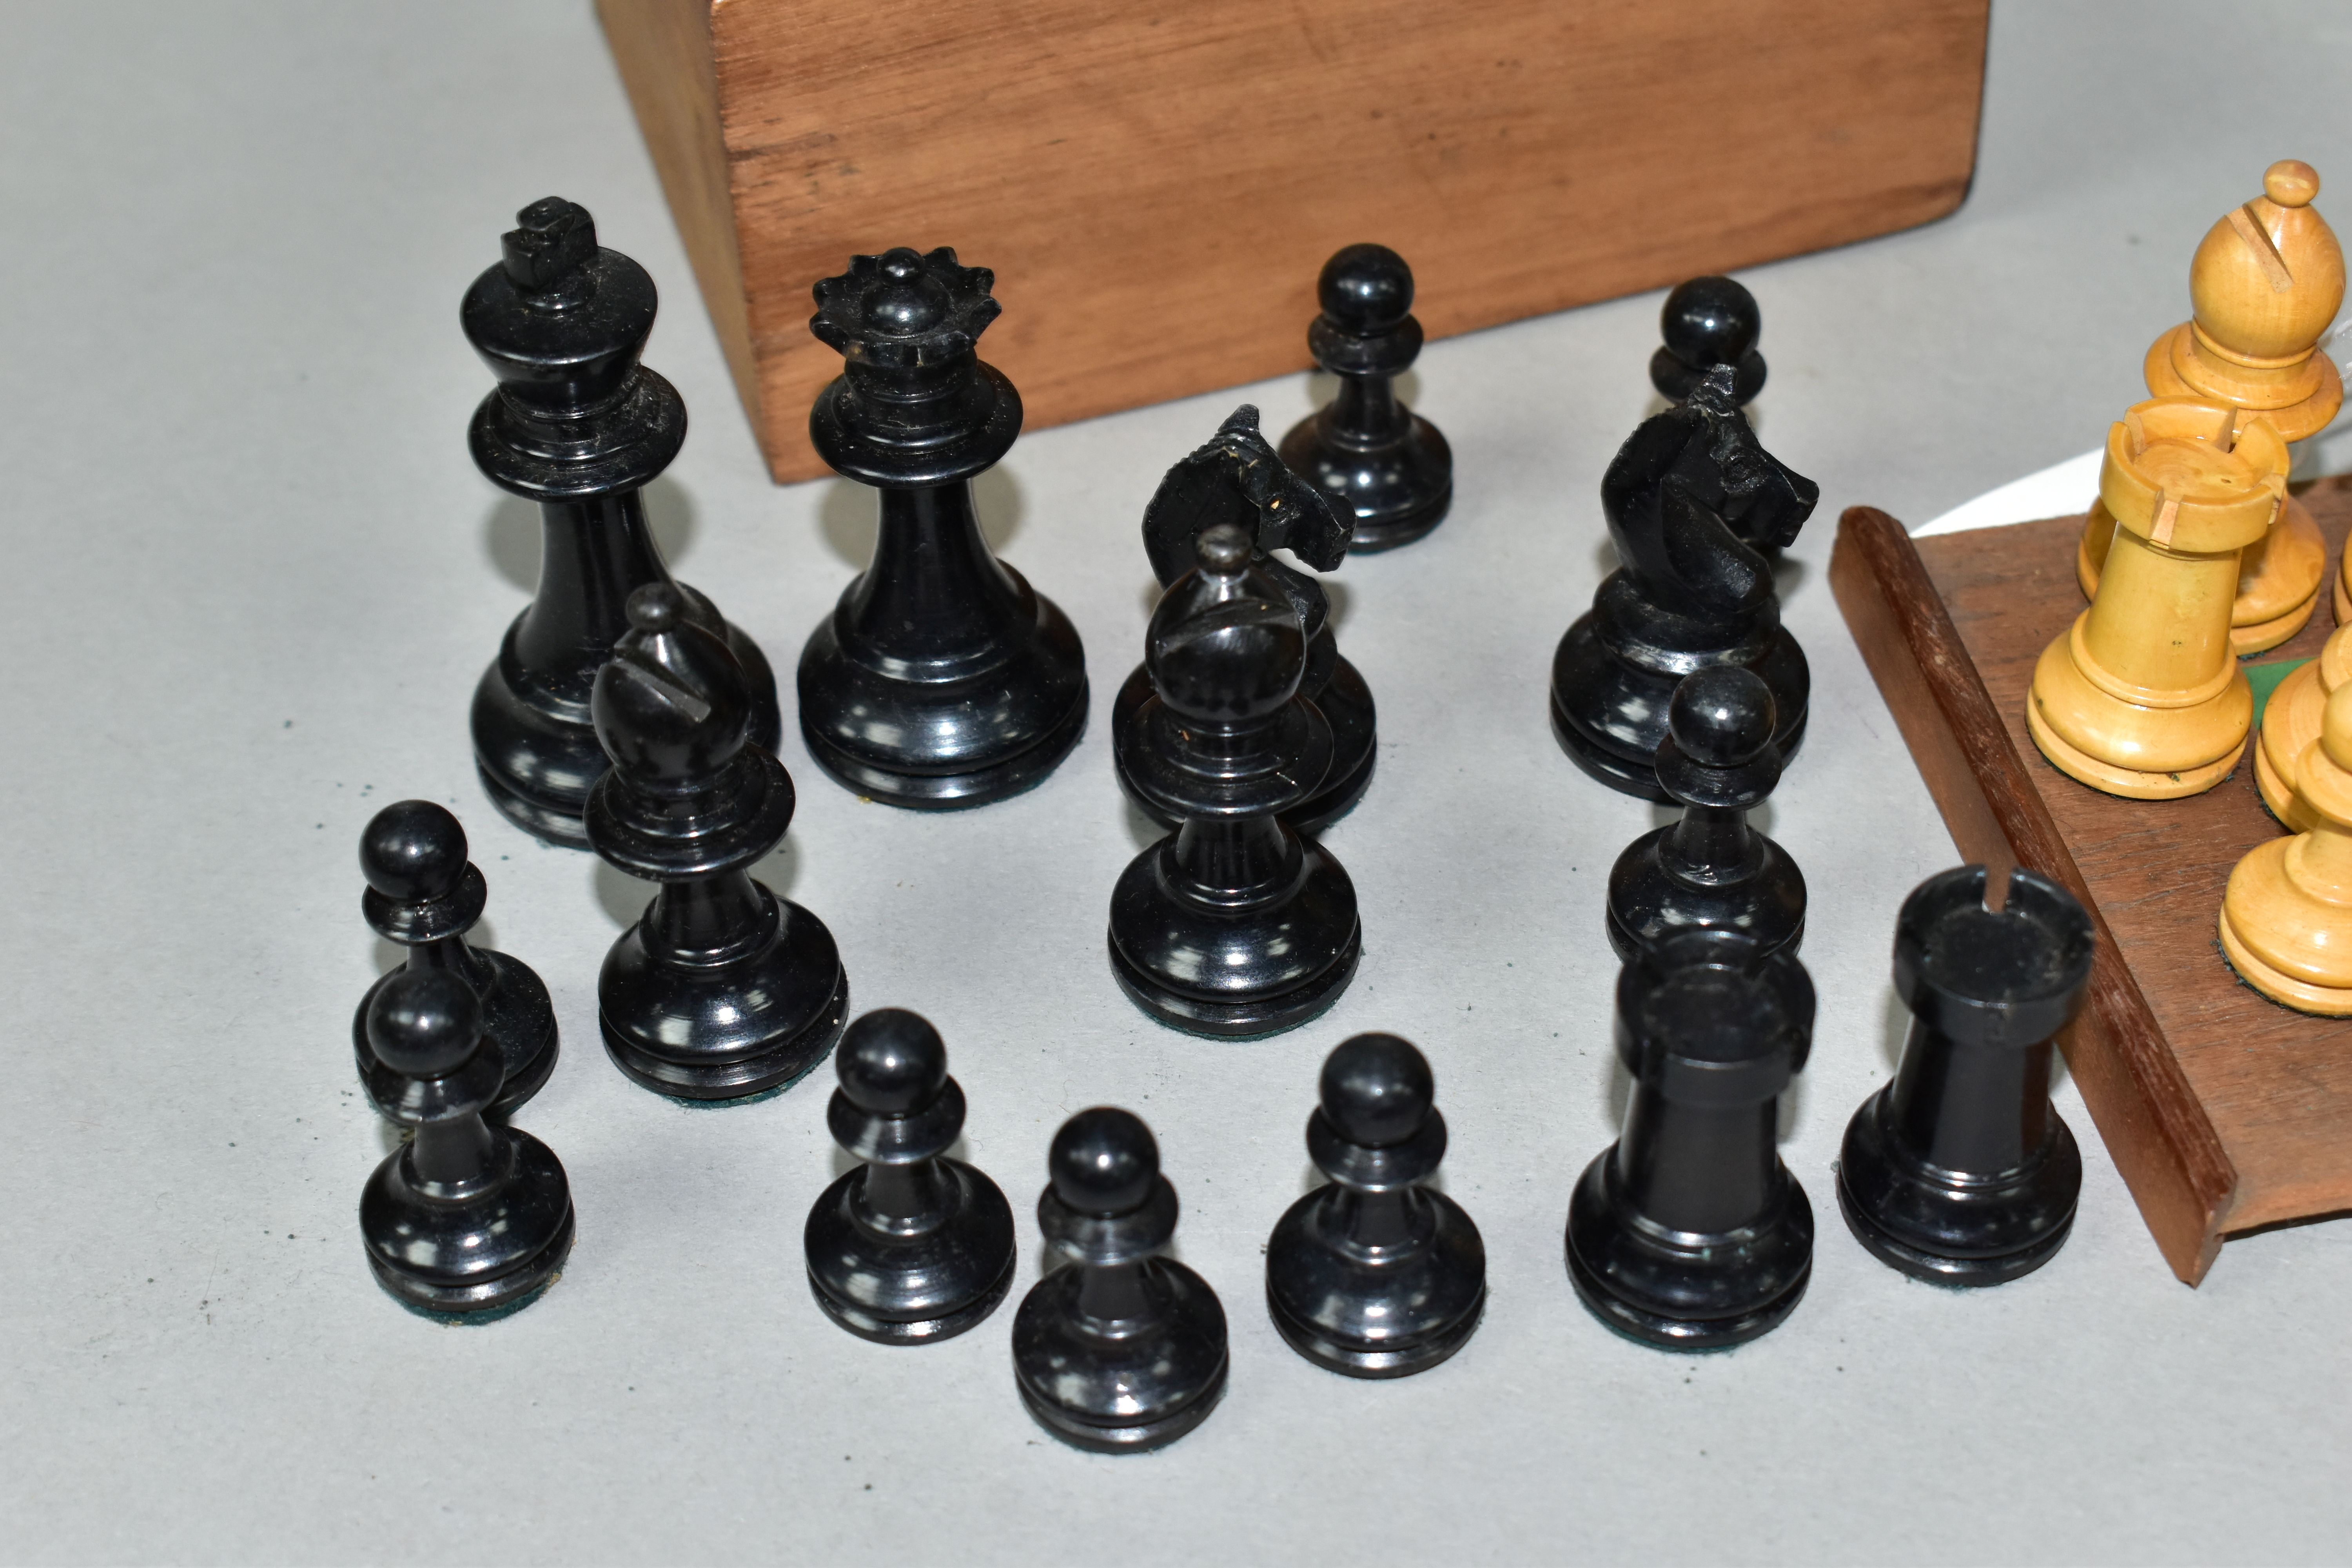 A BOXED WOODEN ORIGINAL CHESS SET, all pieces present, no obvious damage (1) - Image 3 of 5